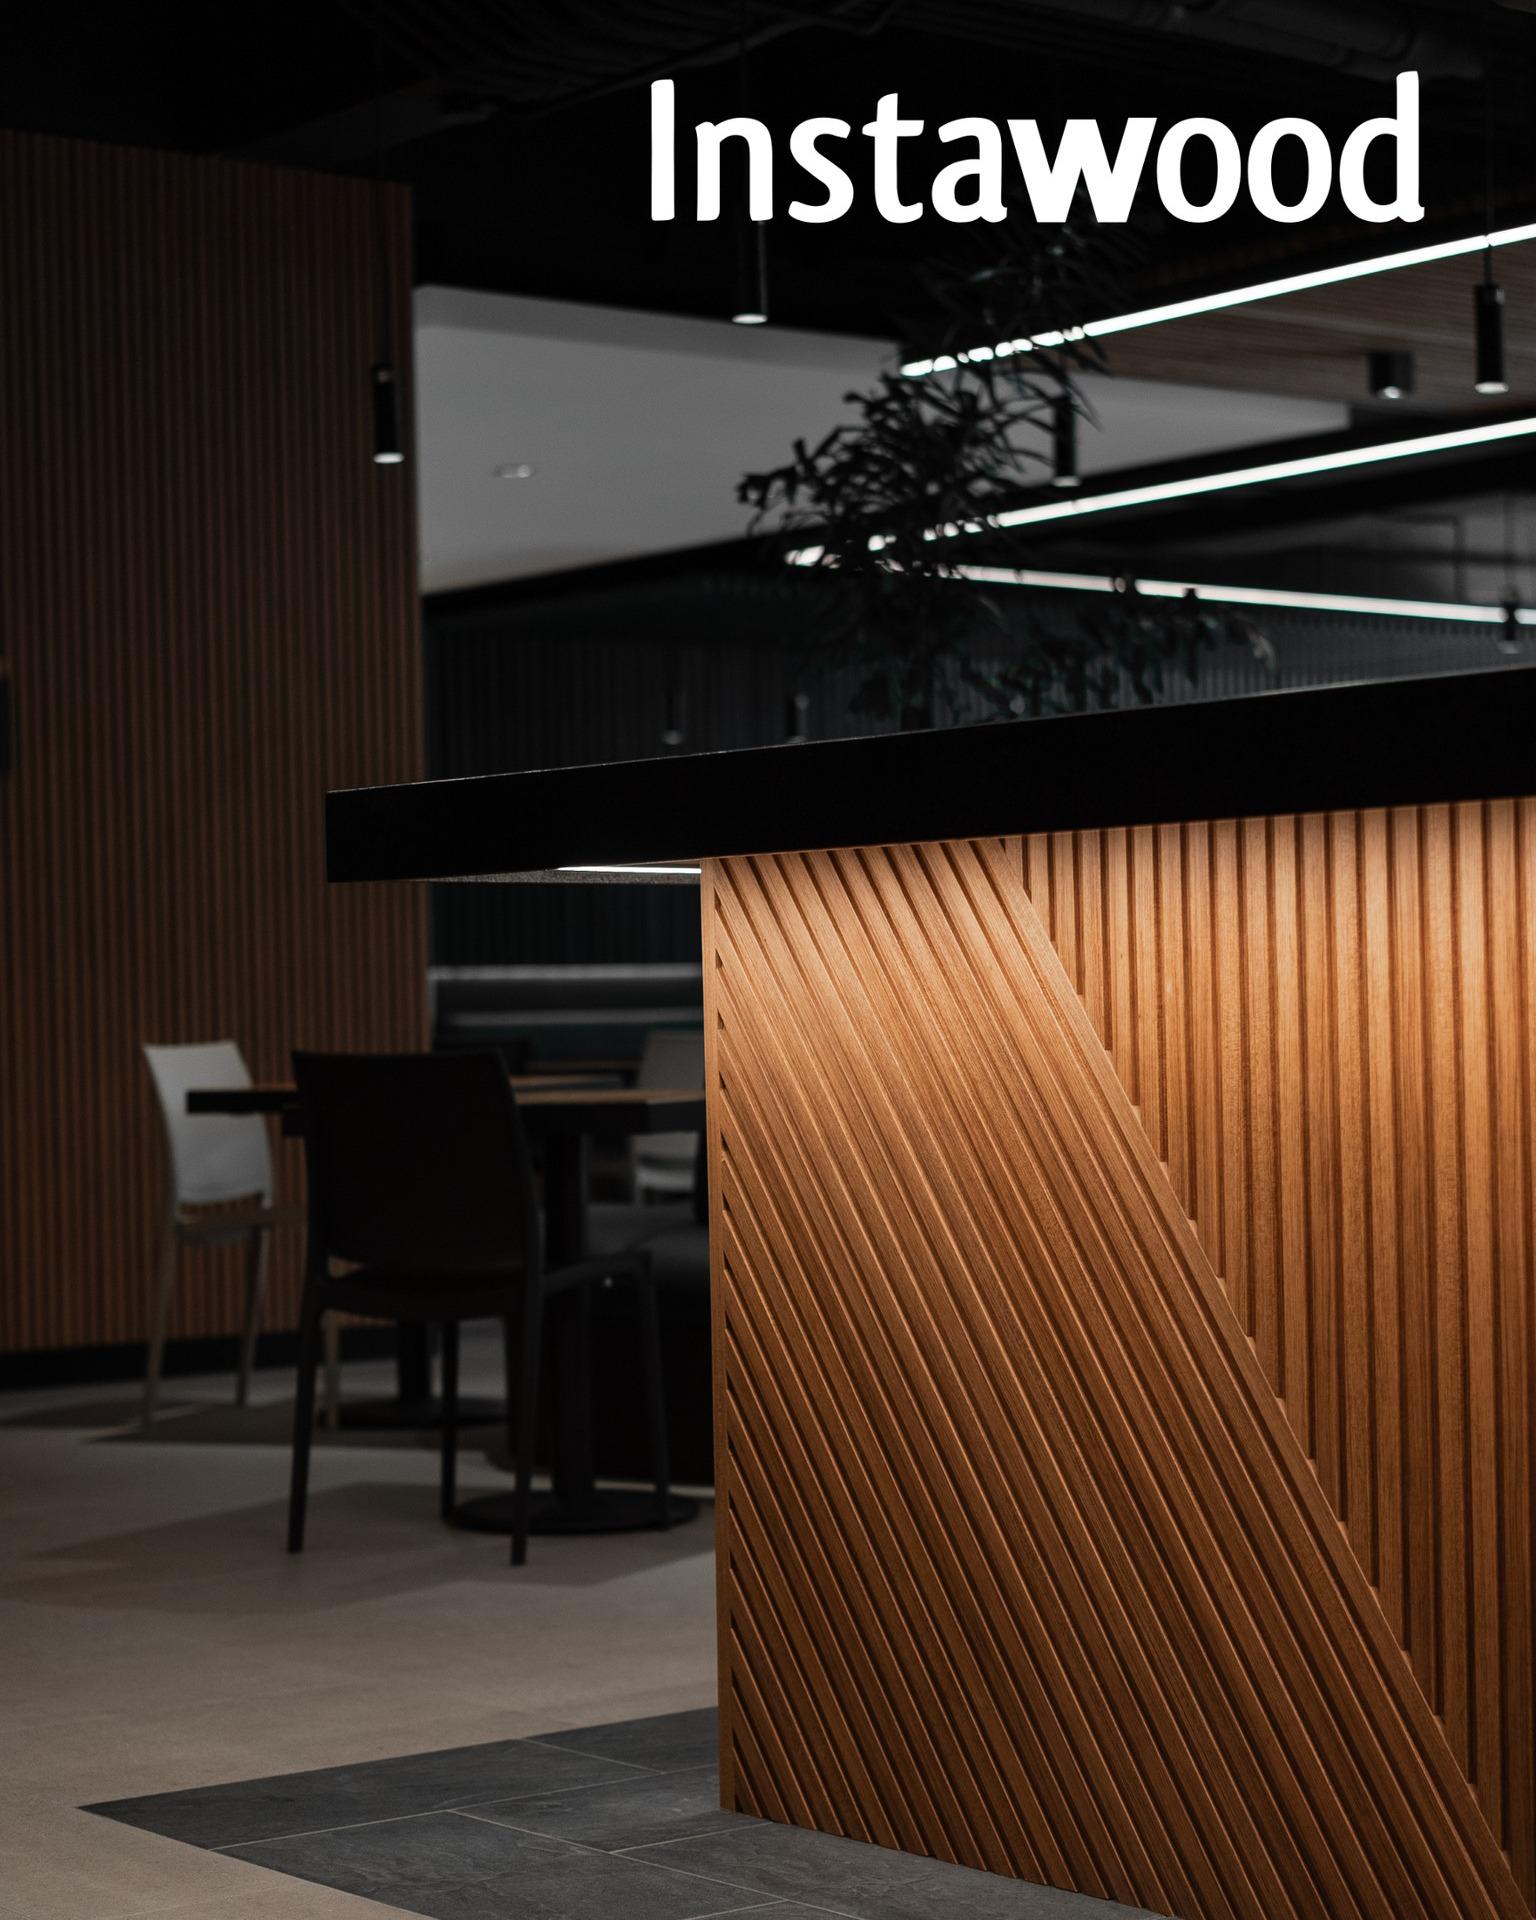 Instawood
wood panels
best home renovations in san diego ca Instagreen San Diego San Diego (858)372-6665